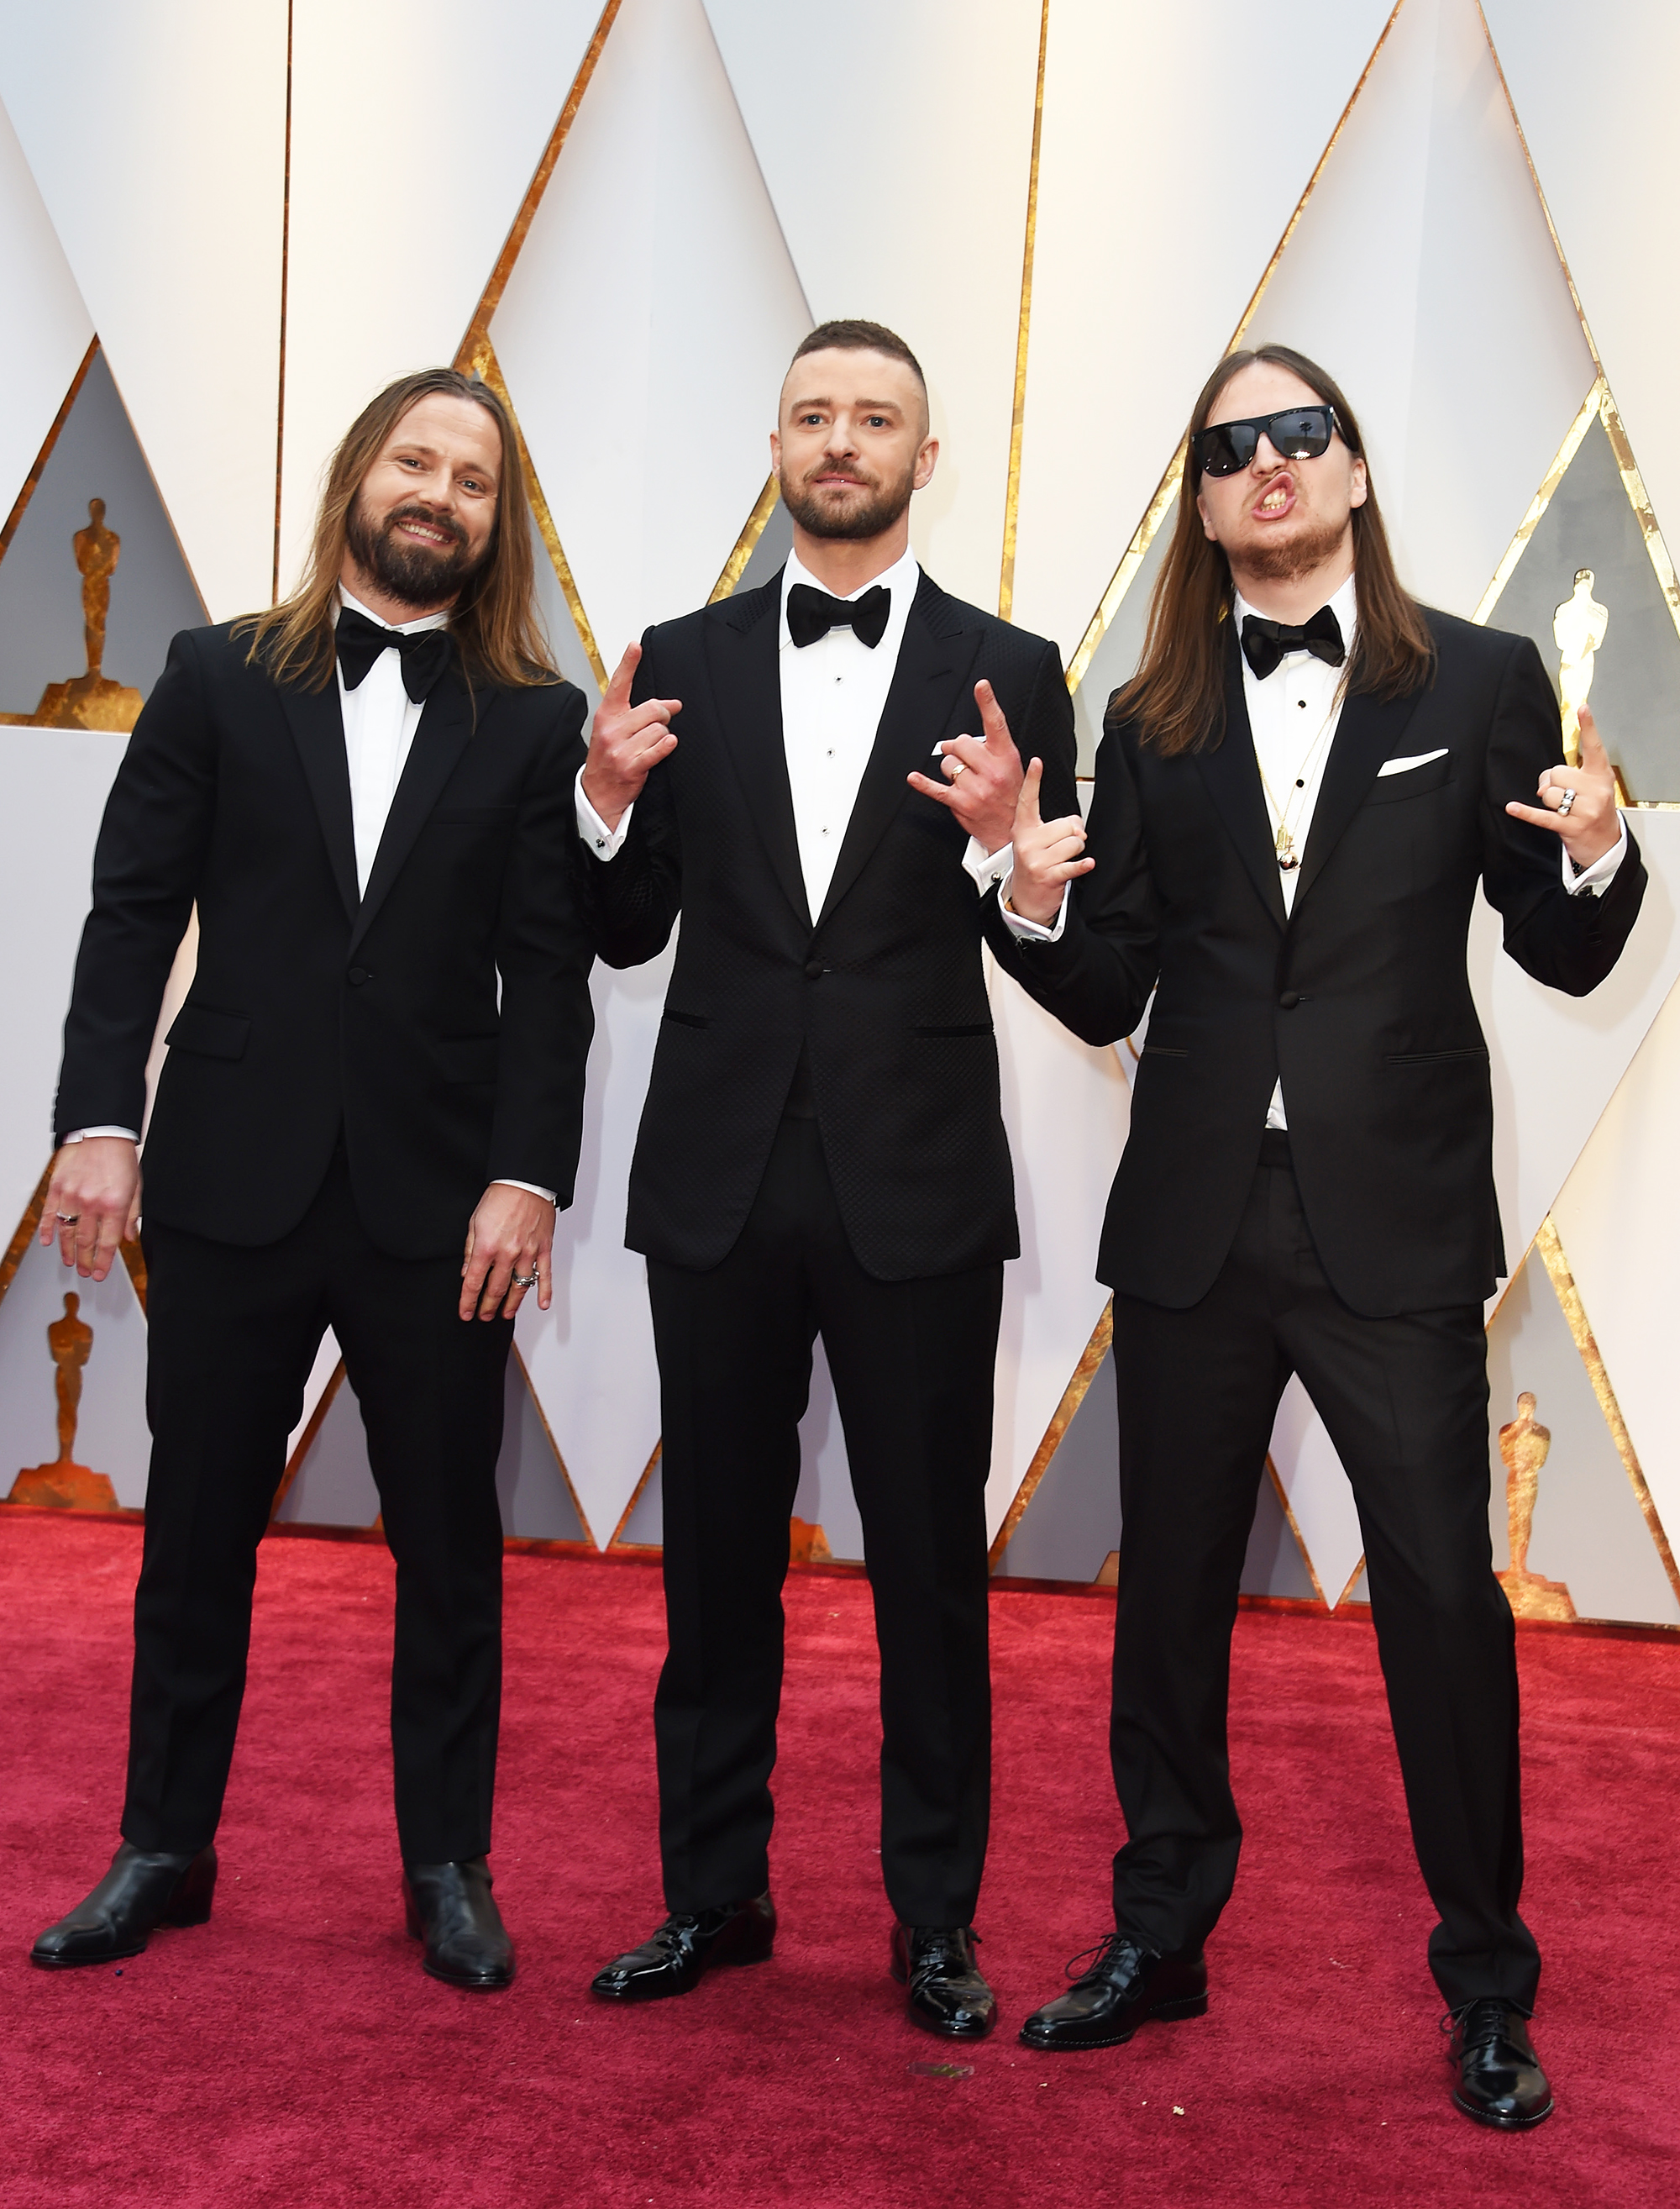 Max Martin, Justin Timberlake and Karl Johan Schuster on the red carpet for the 89th Oscars, on Feb. 26, 2017 in Hollywood, Calif.